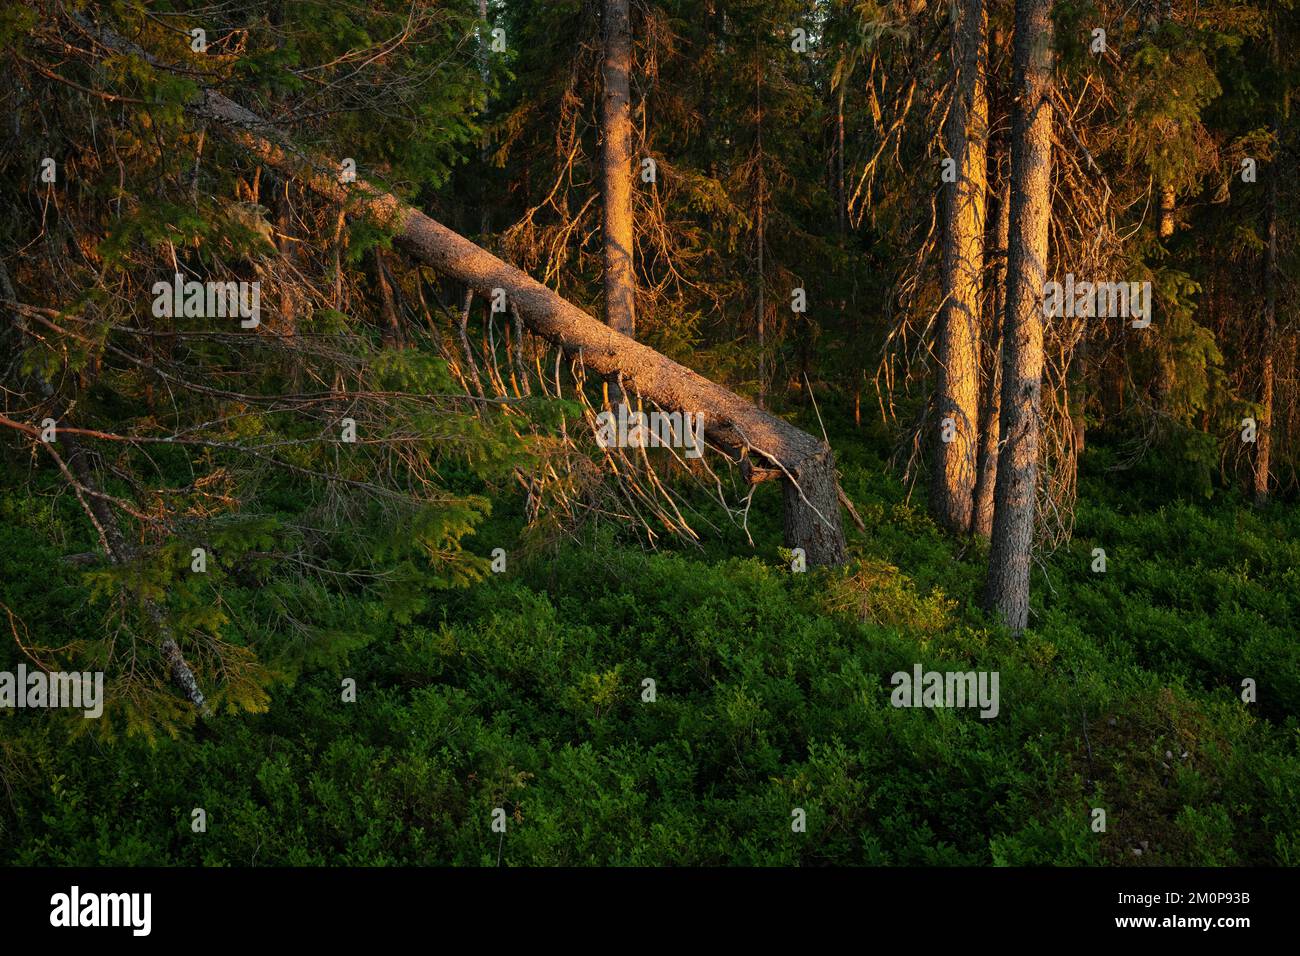 Summery and lush old-growth forest during a sunset near Hossa, Northern Finland Stock Photo